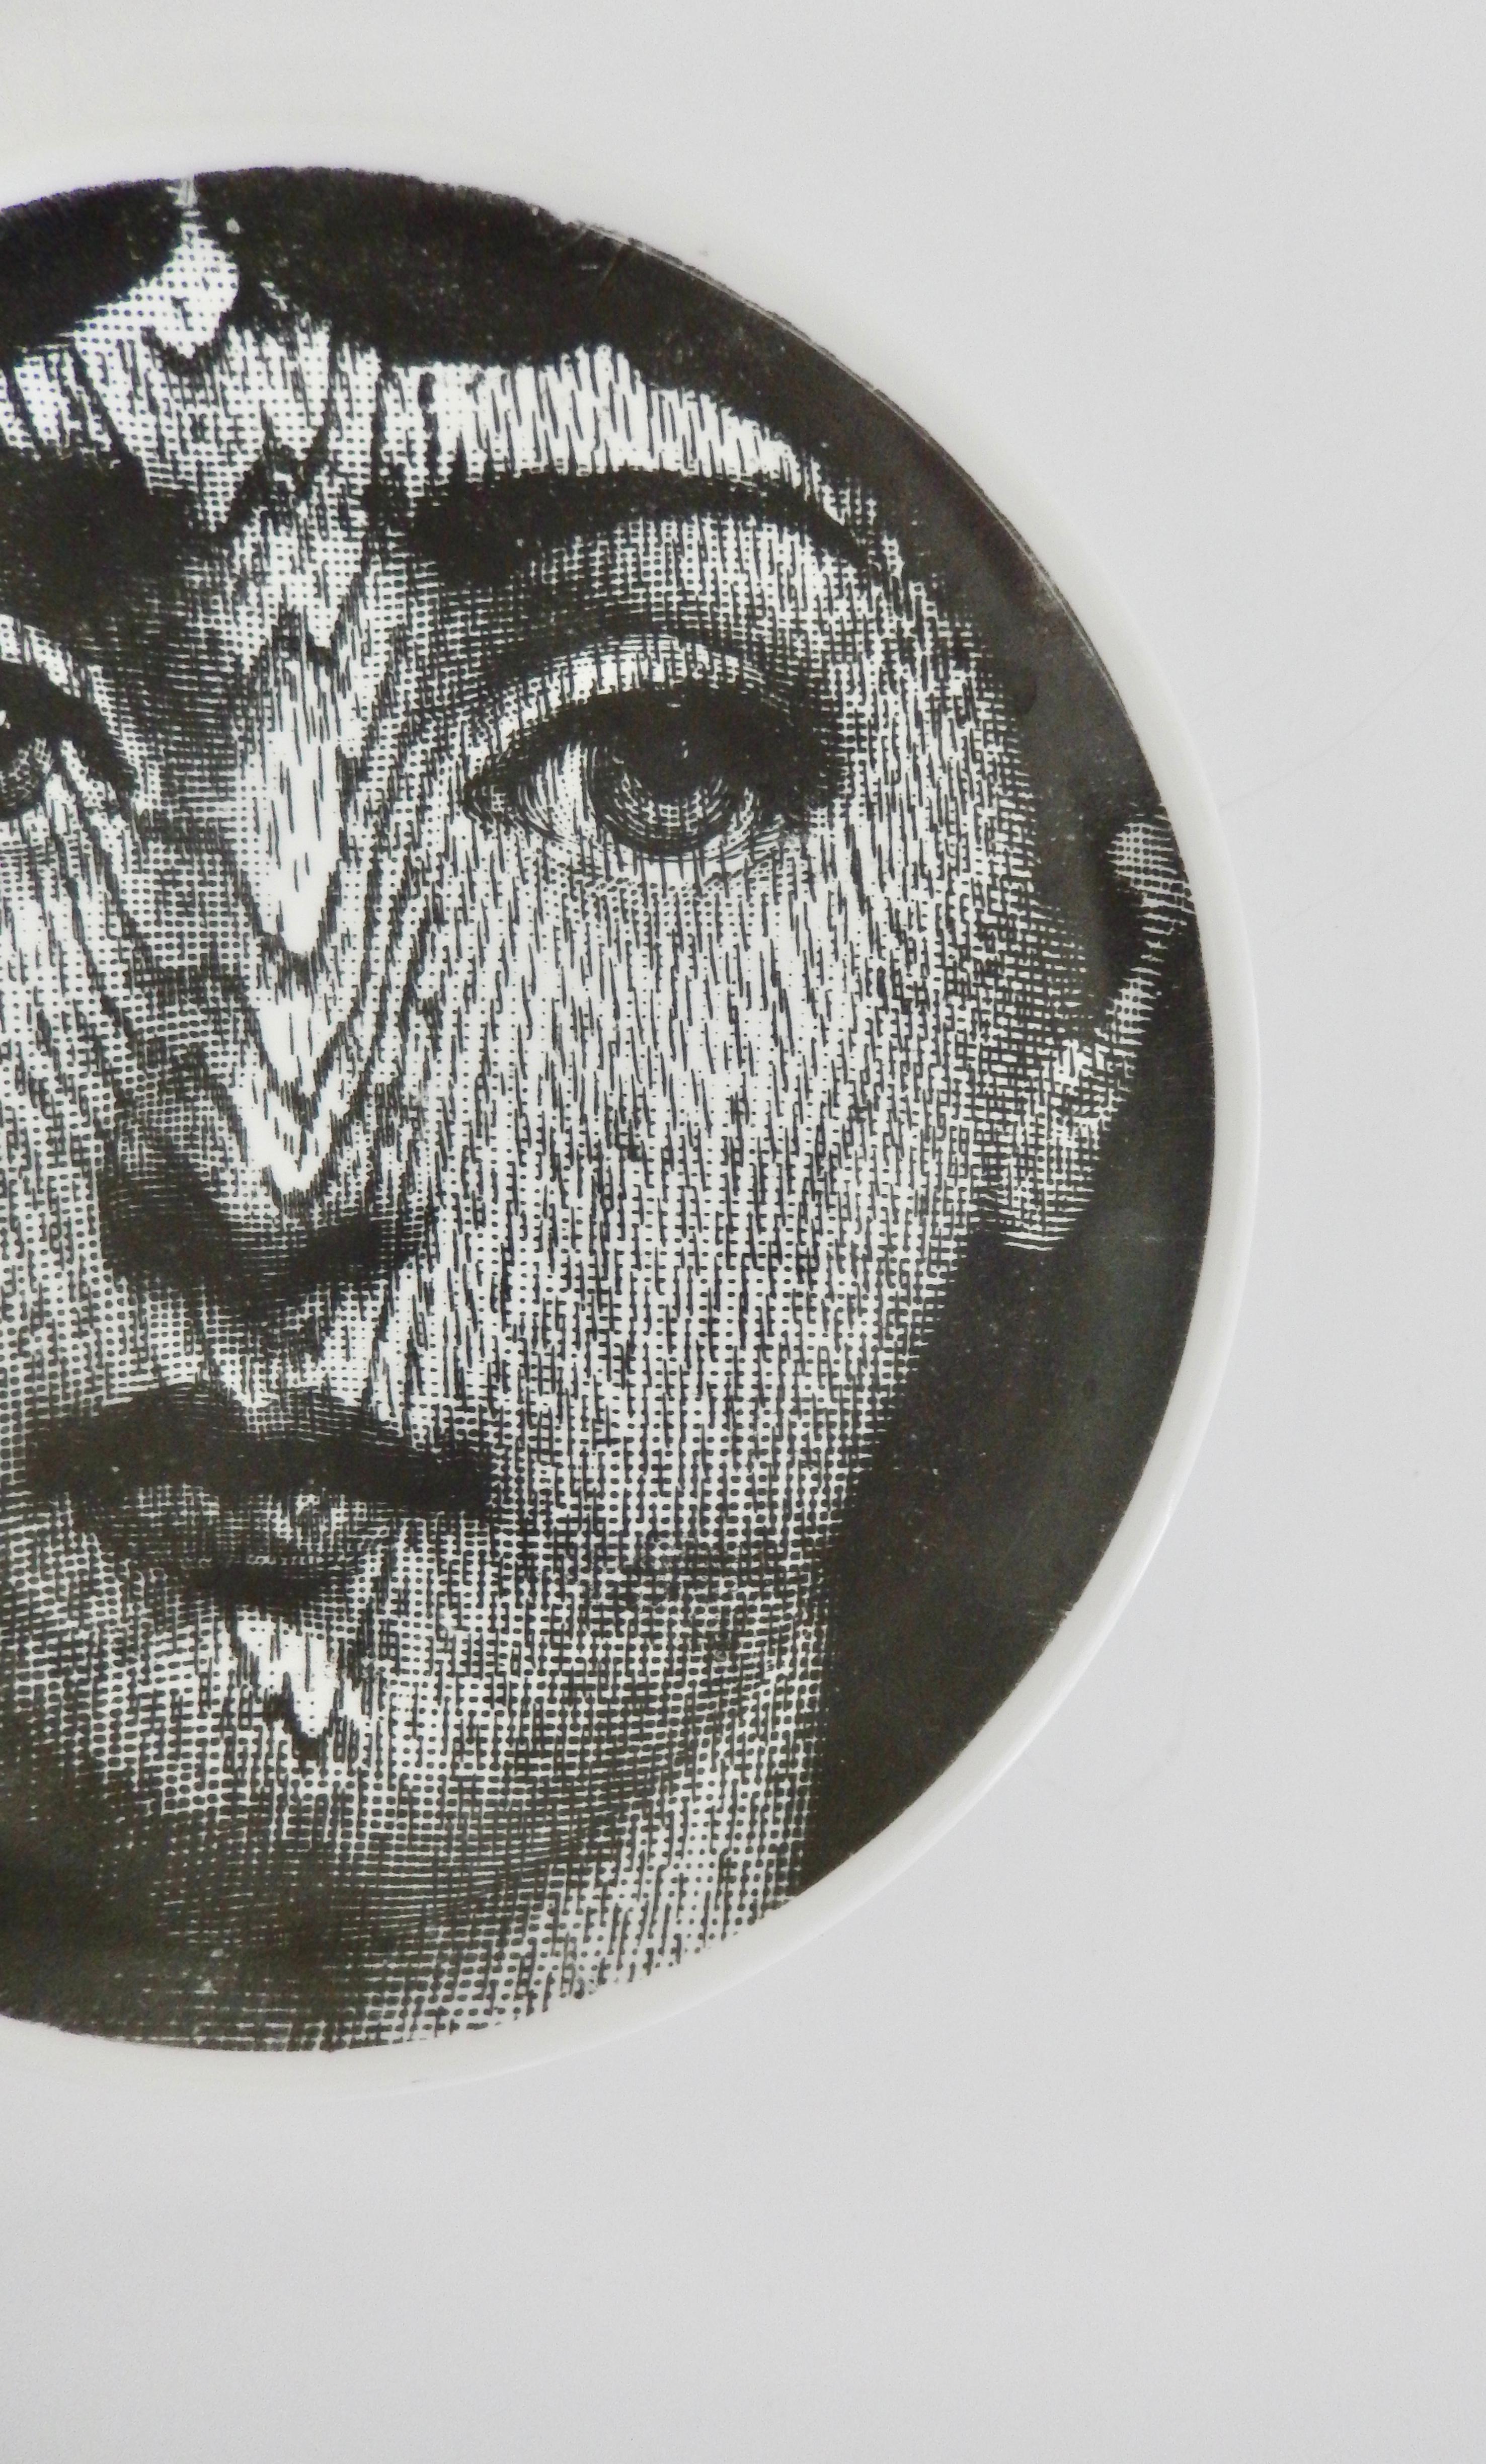 Italian Midcentury Fornasetti Face Plate, Tema e Variazione N90 For Sale